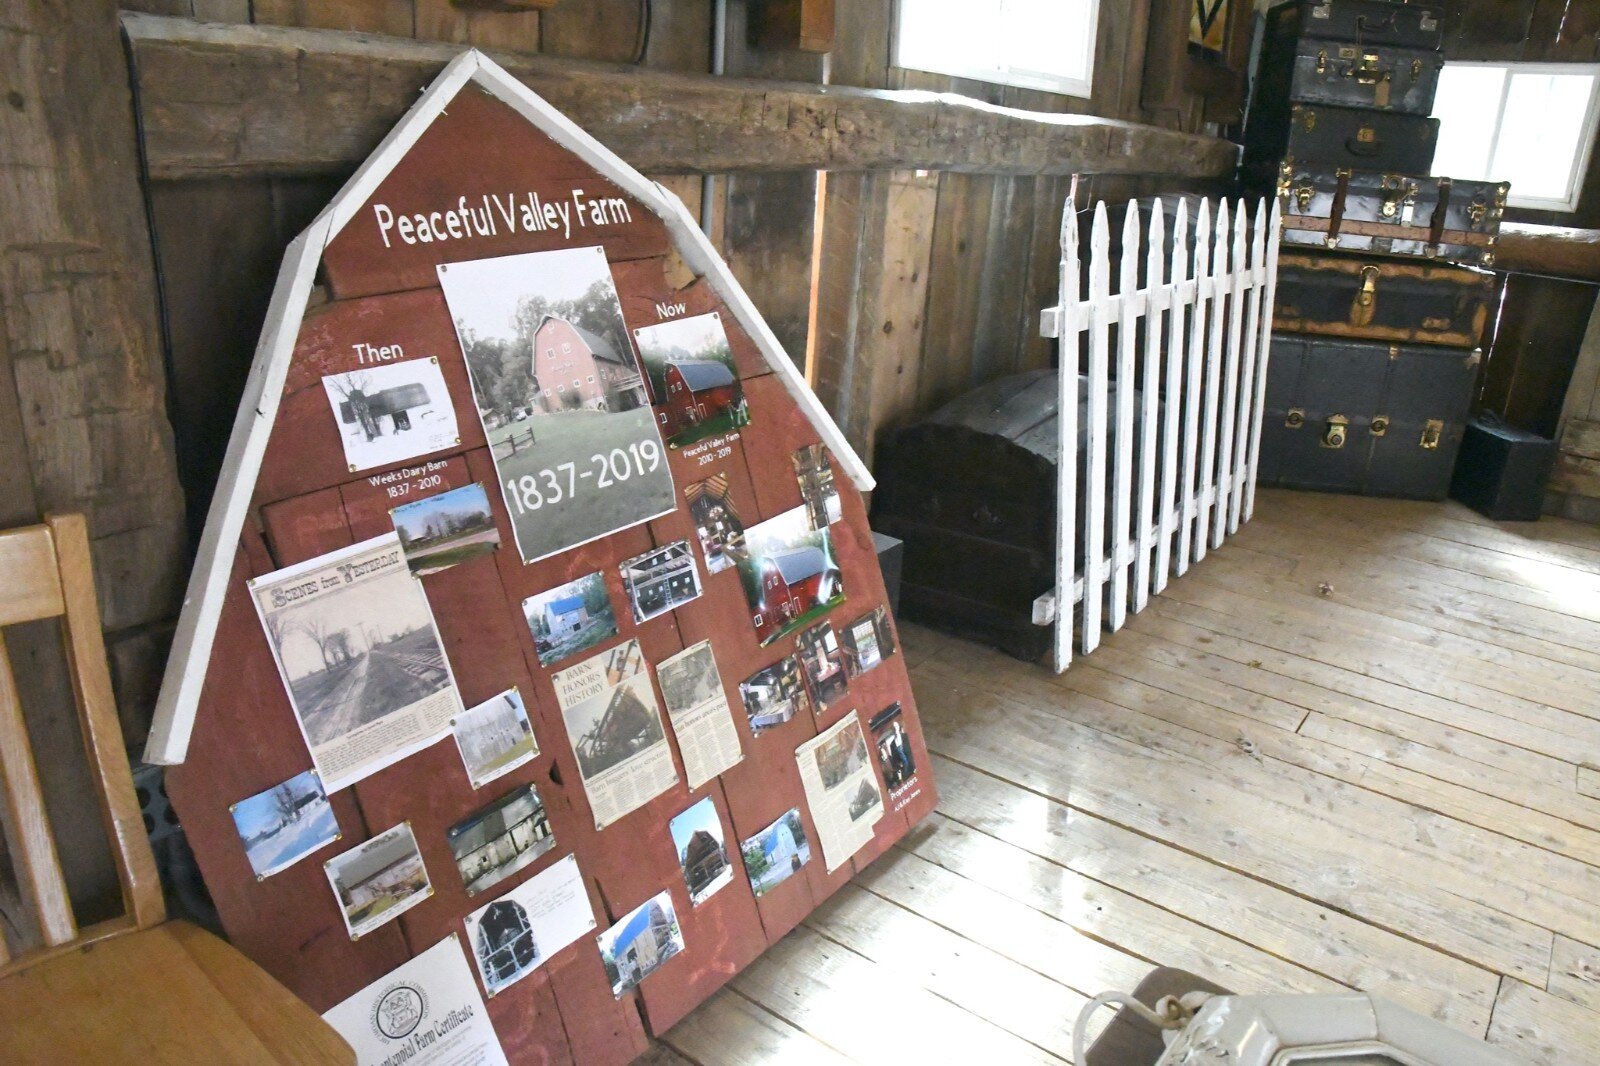 History of the Peace Valley Farm are on display inside the barn.